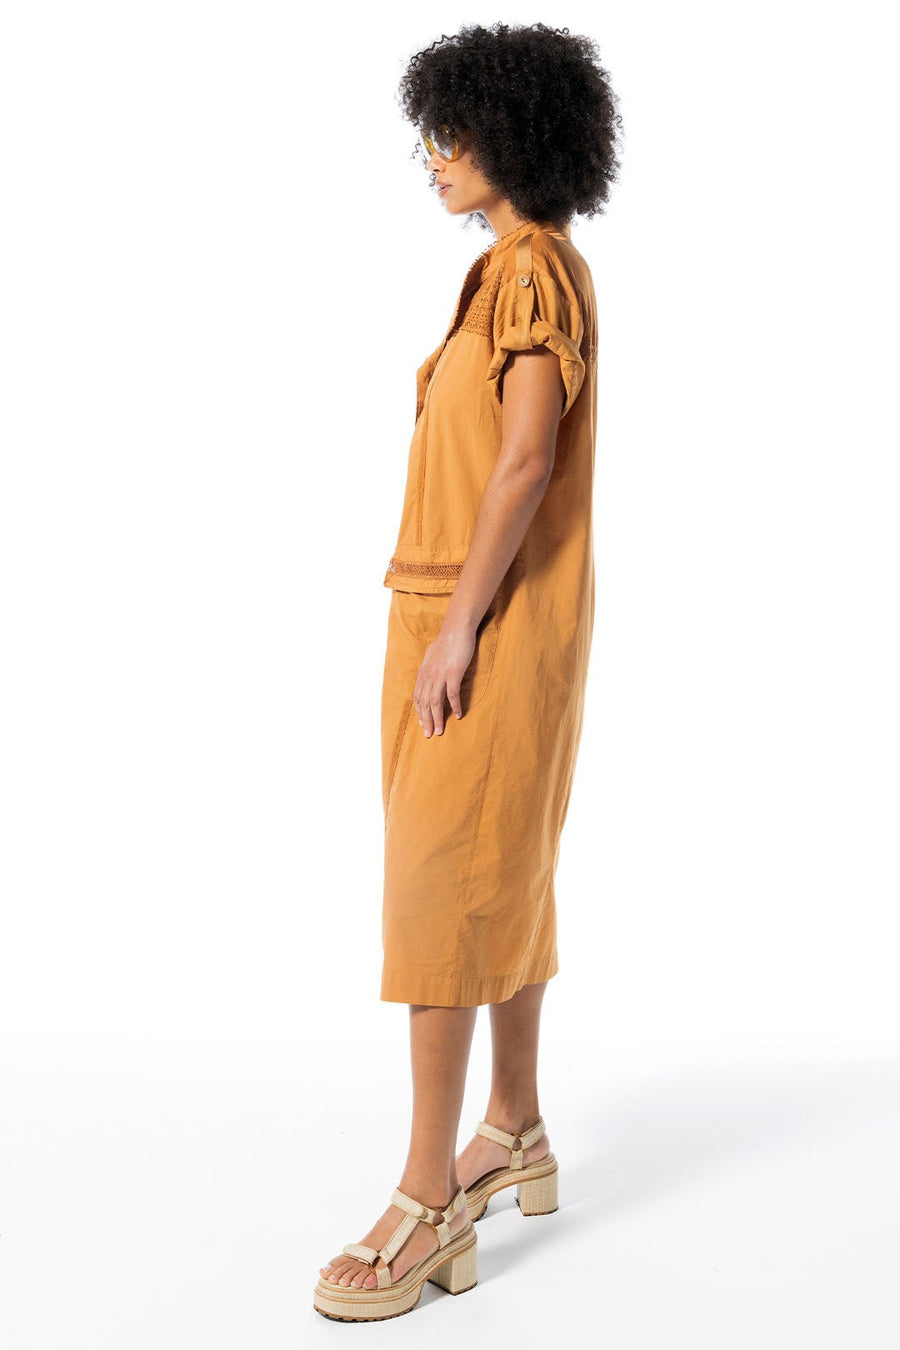 ALEXANDRIA MILITARY CAFTAN, AMBER - Burning Torch Online Boutique